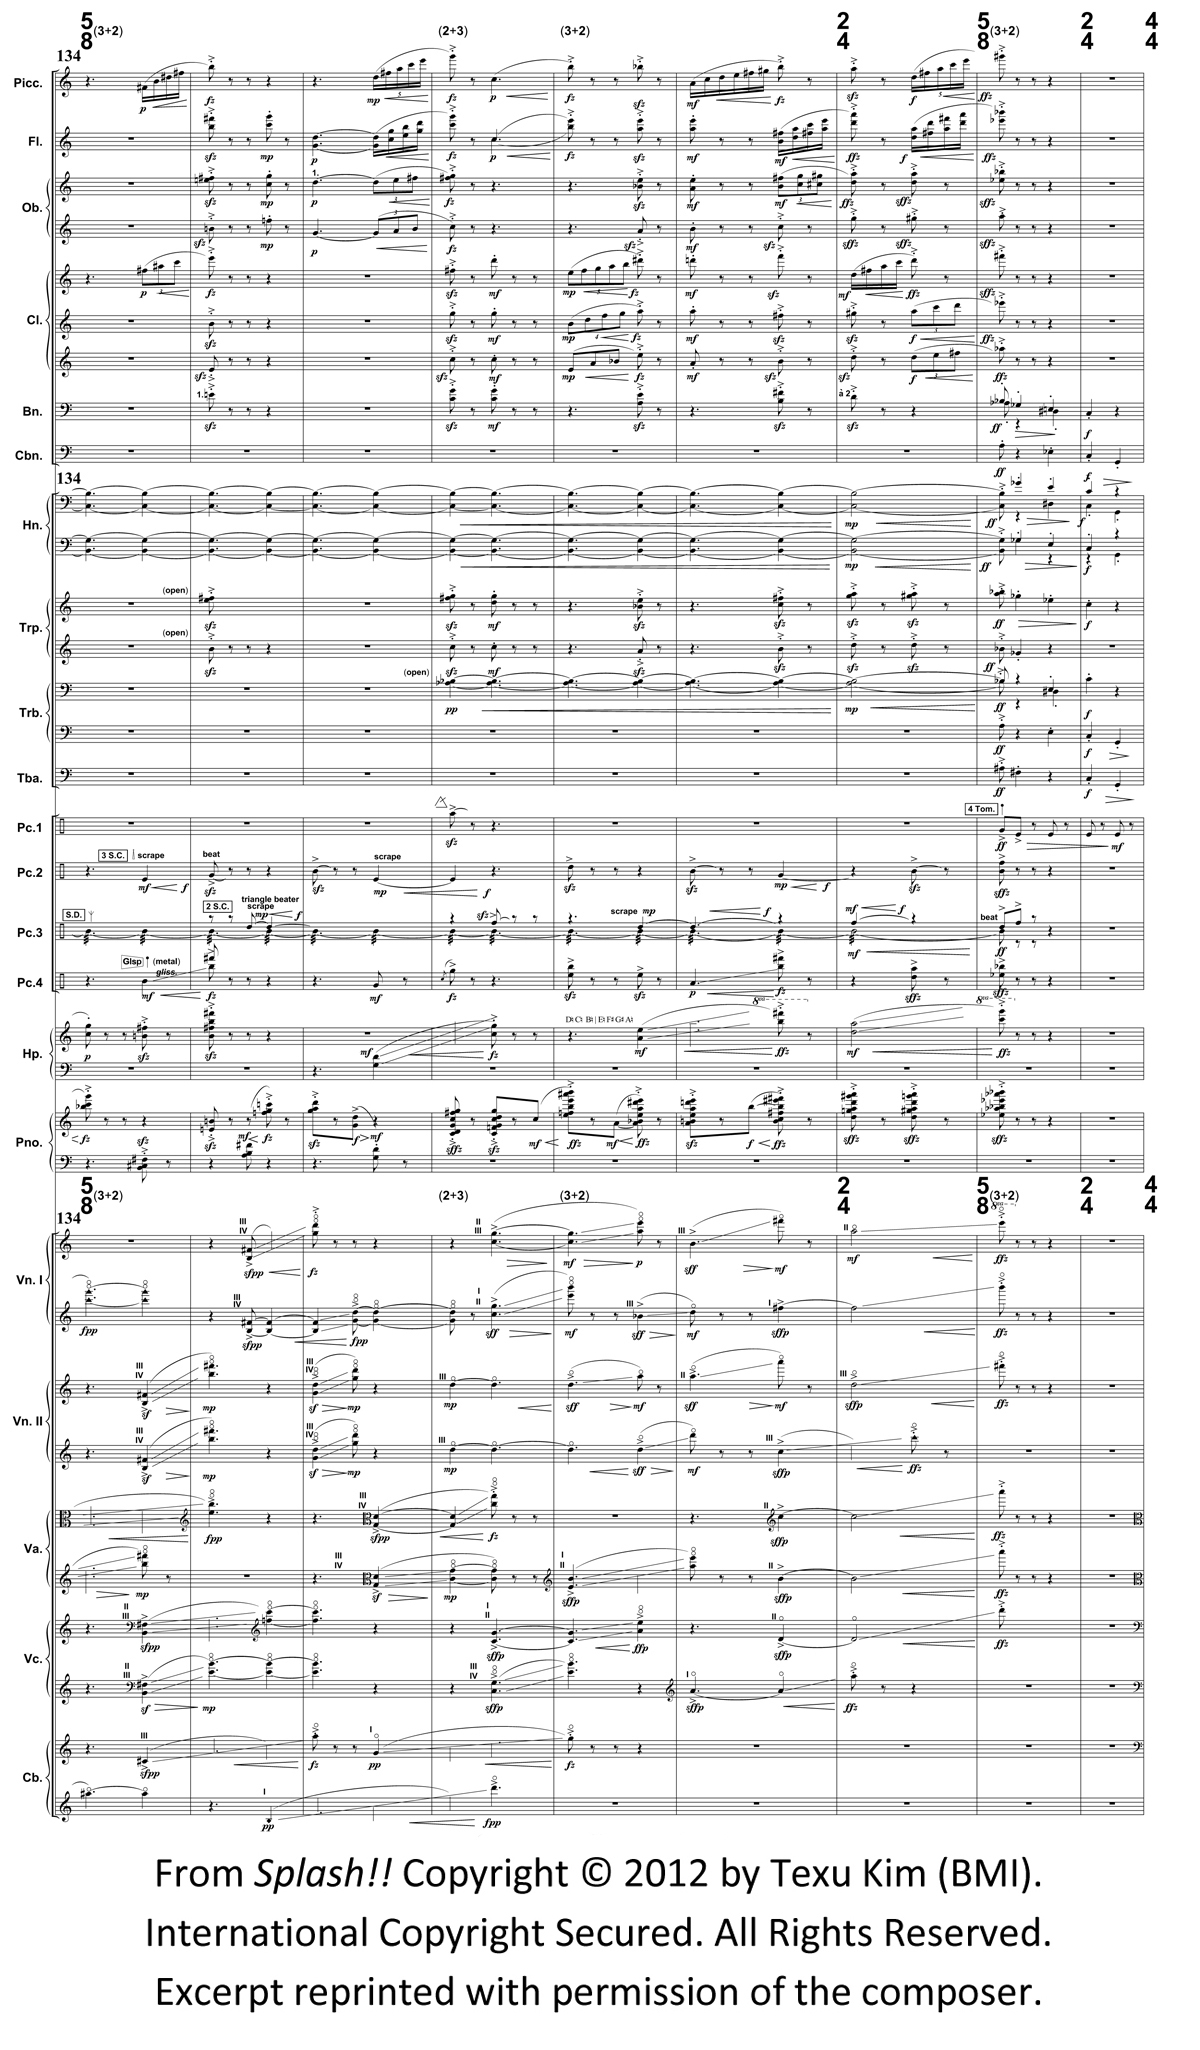 A page from the orchestral score of Texu Kim's Splash!!